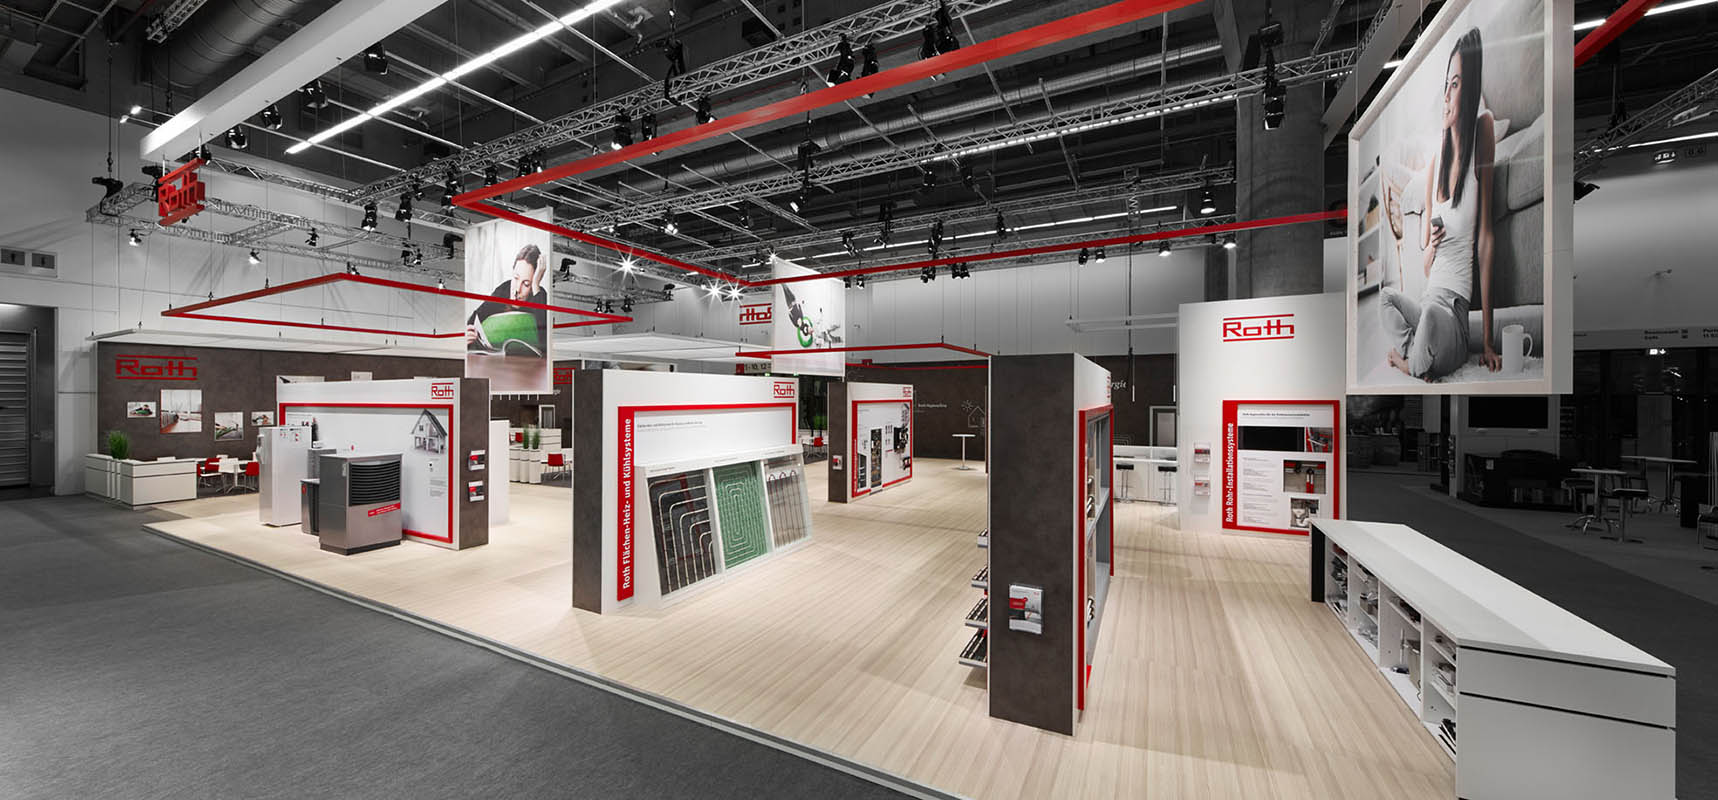 Exhibition Stand Builder Display International offers Stand Building and Stand Design as a general contractor